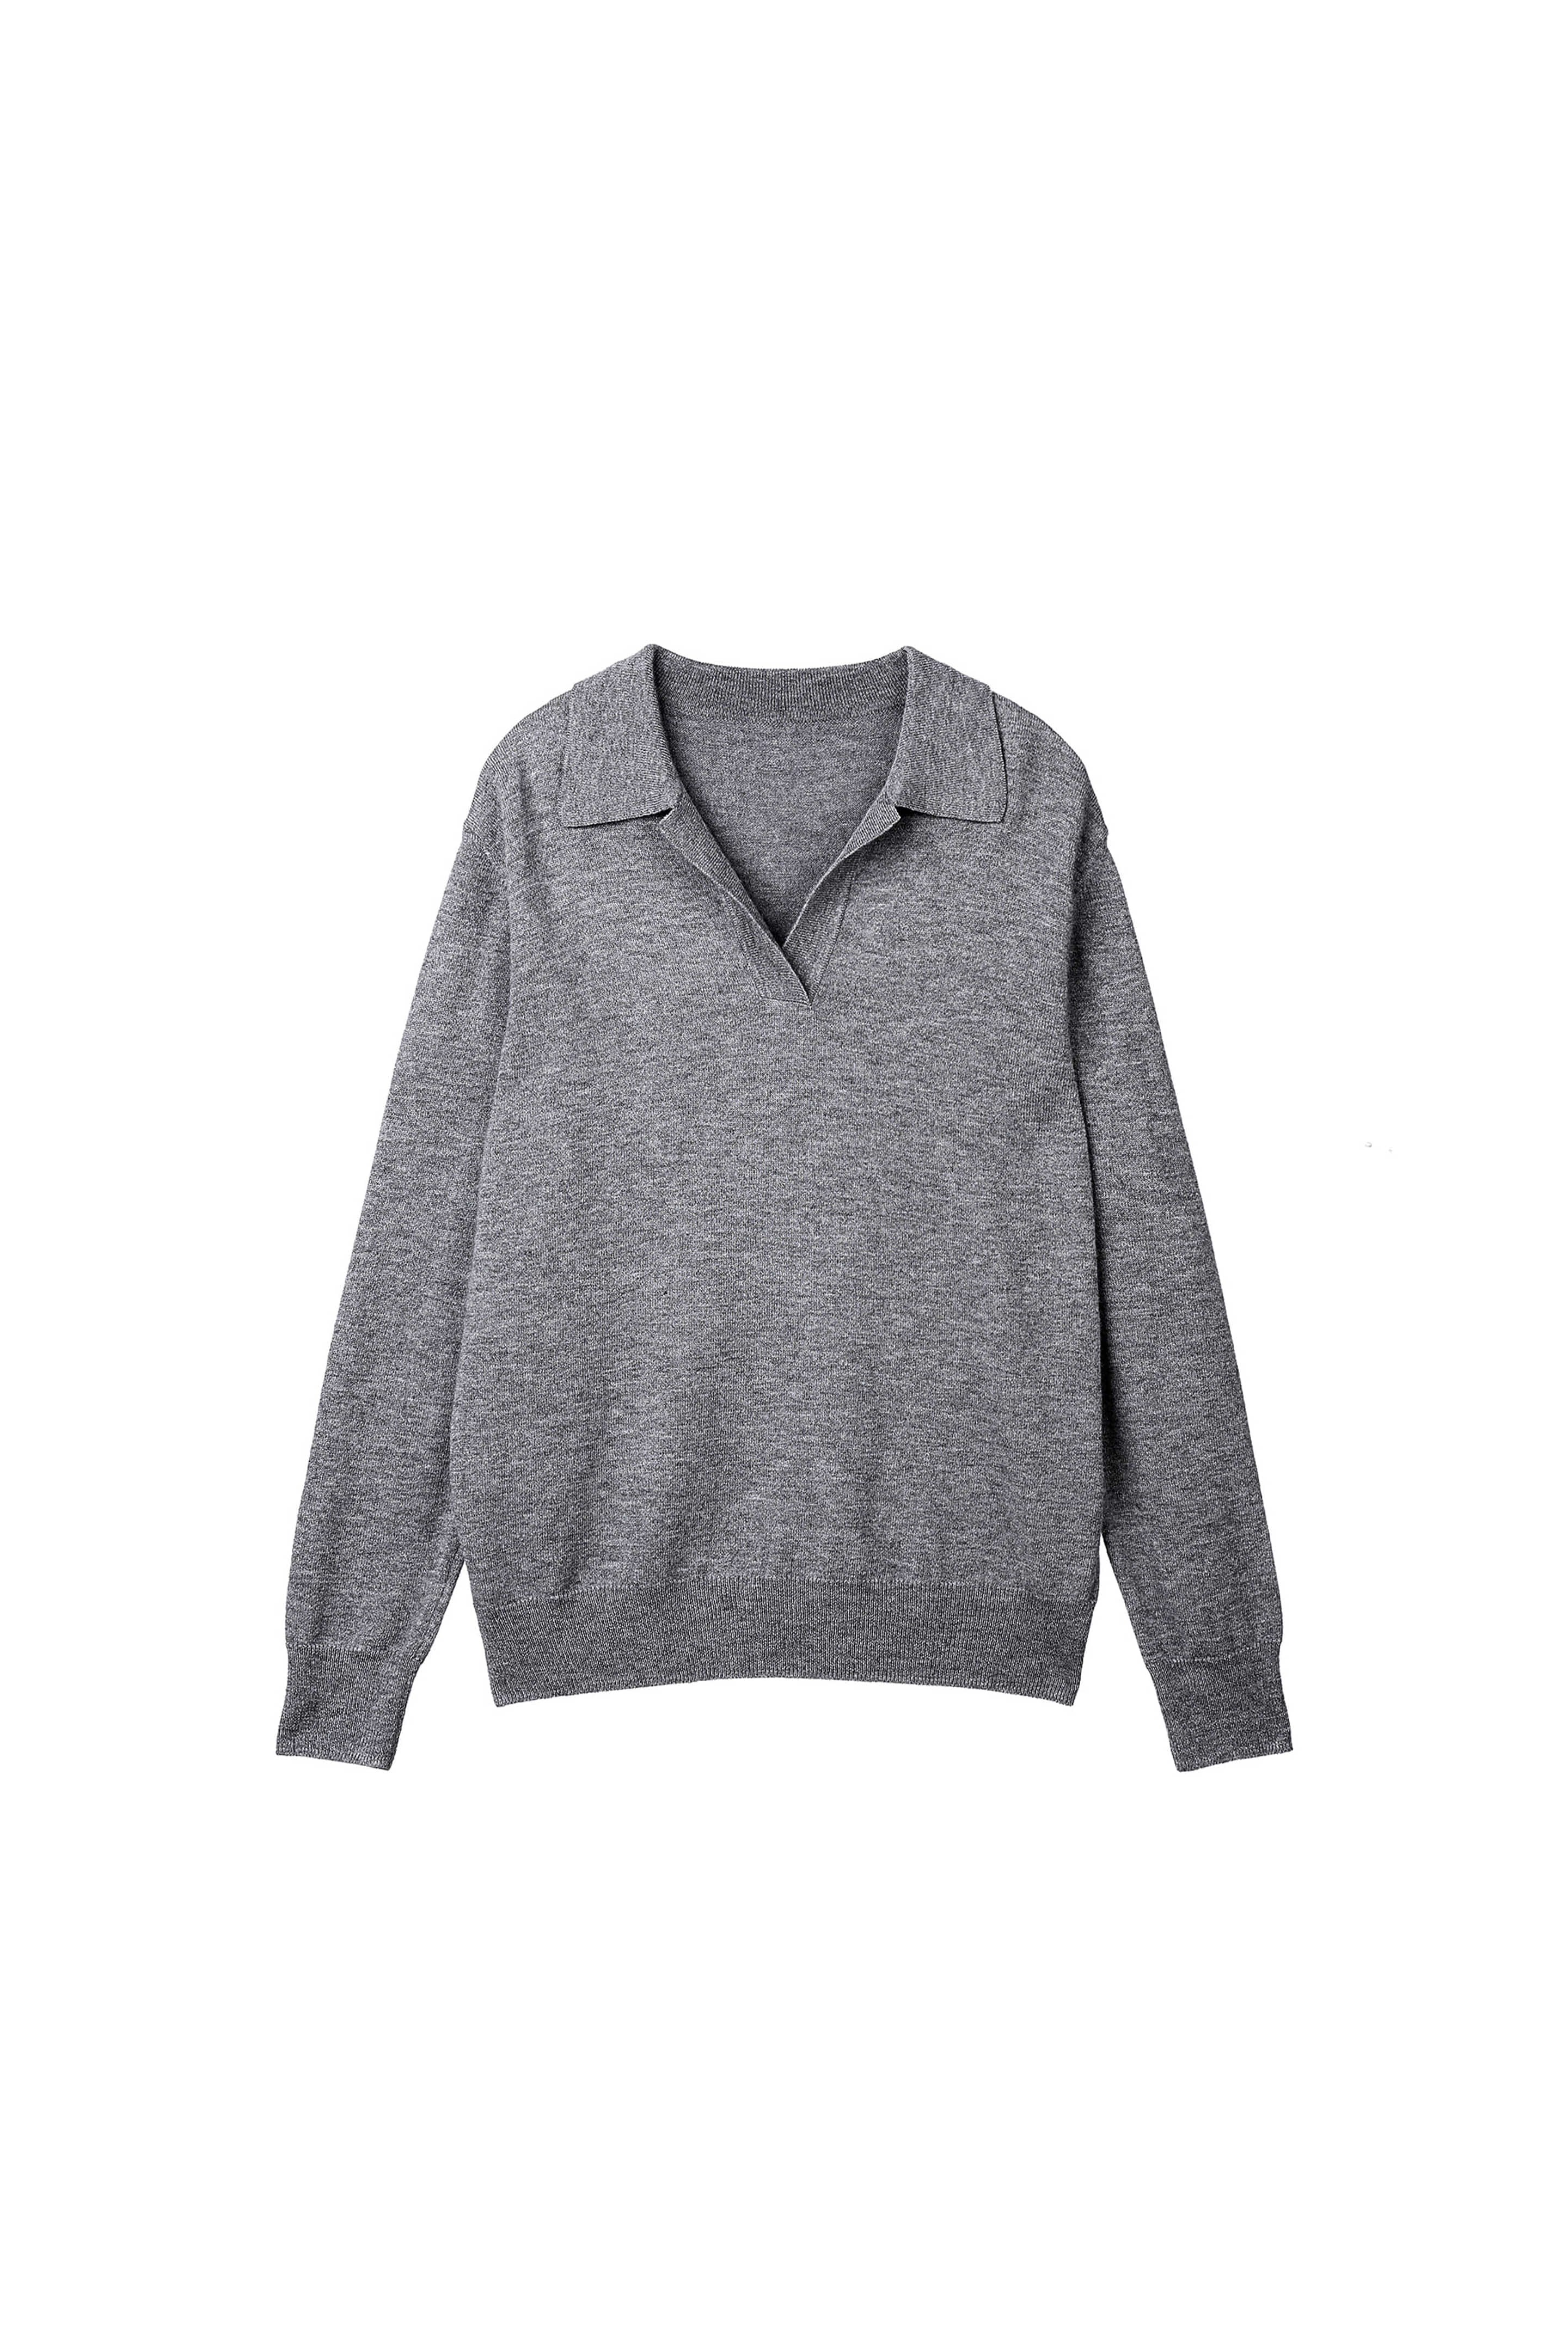 3rd) Knitted Collar Pull-over M.Grey